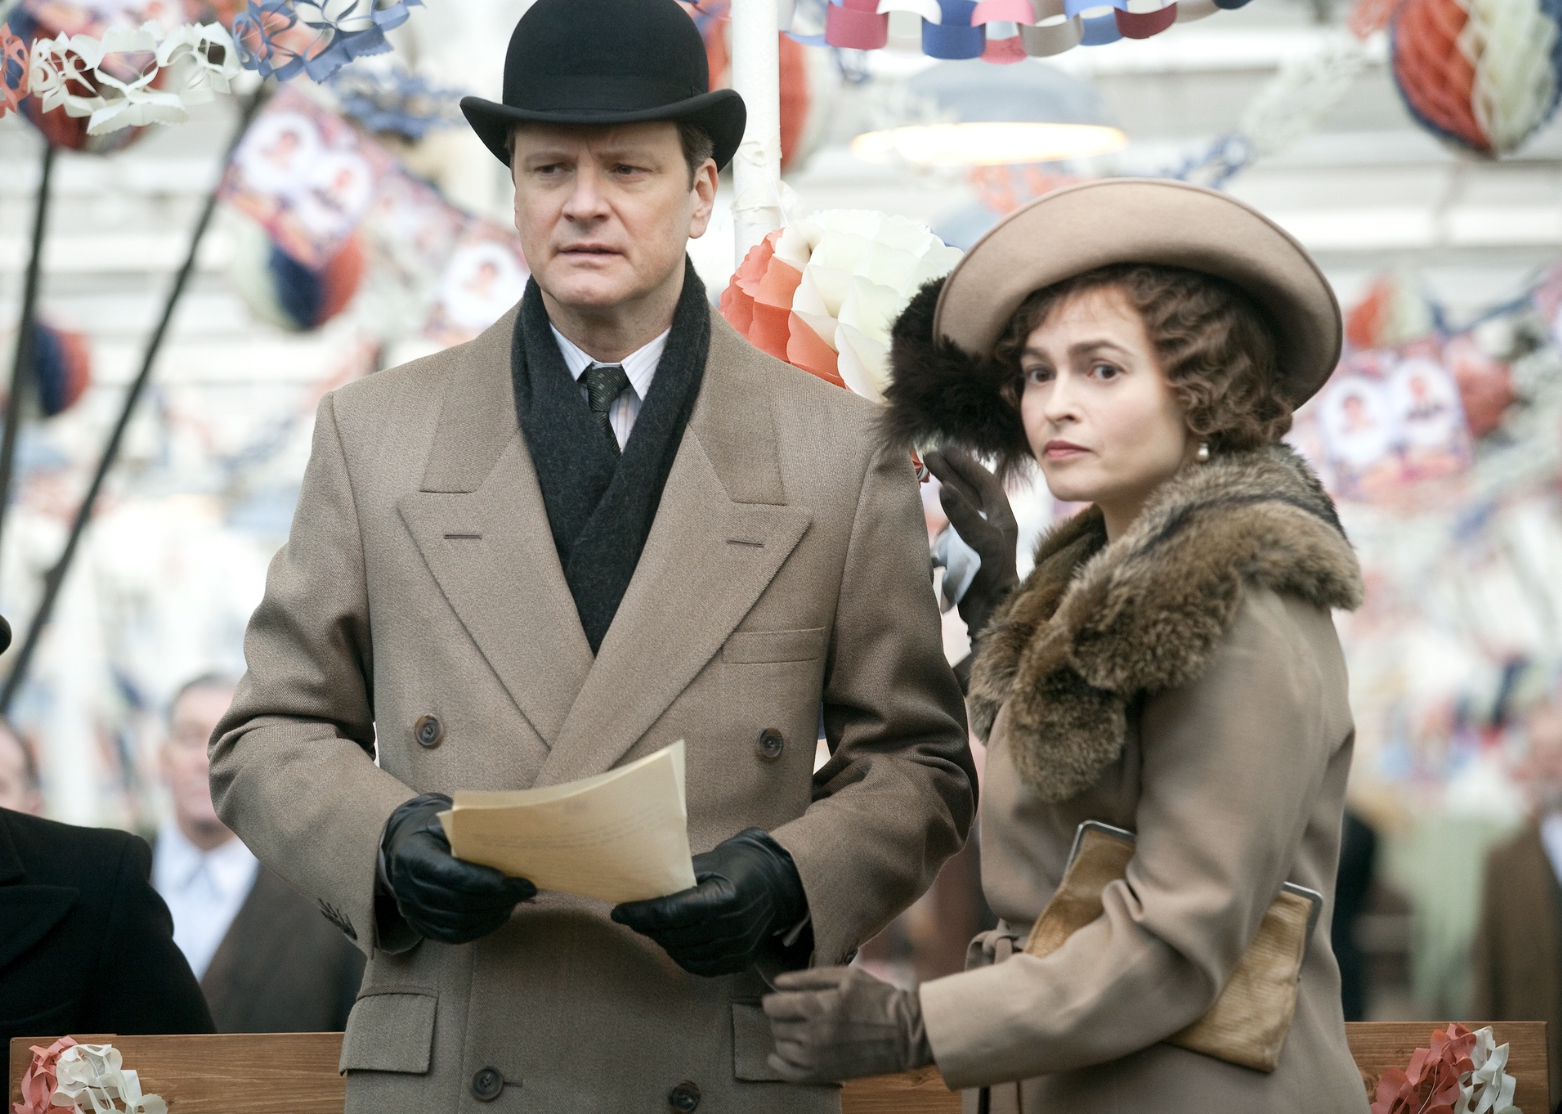 Colin Firth and Helena Bonham Carter in "The King's Speech"